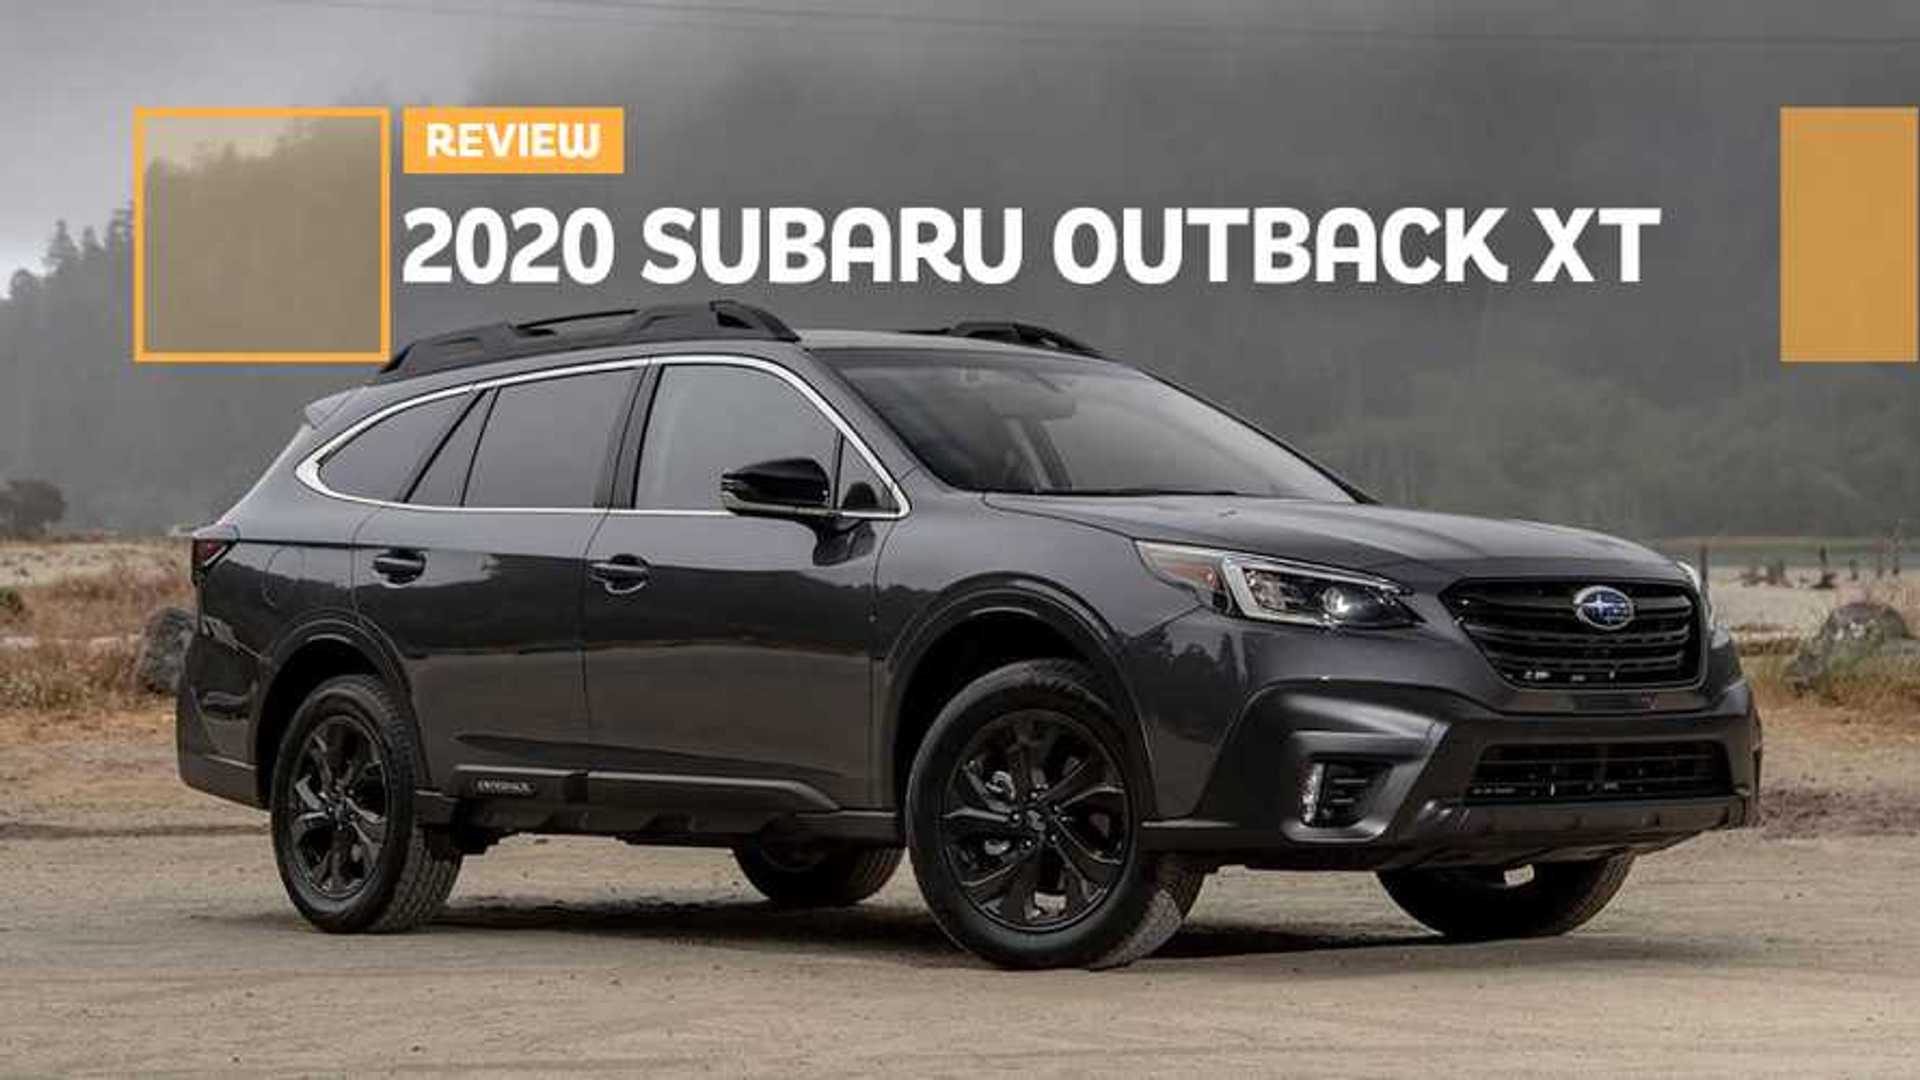 2020 Subaru Outback XT Onyx Edition Review: Rock Solid